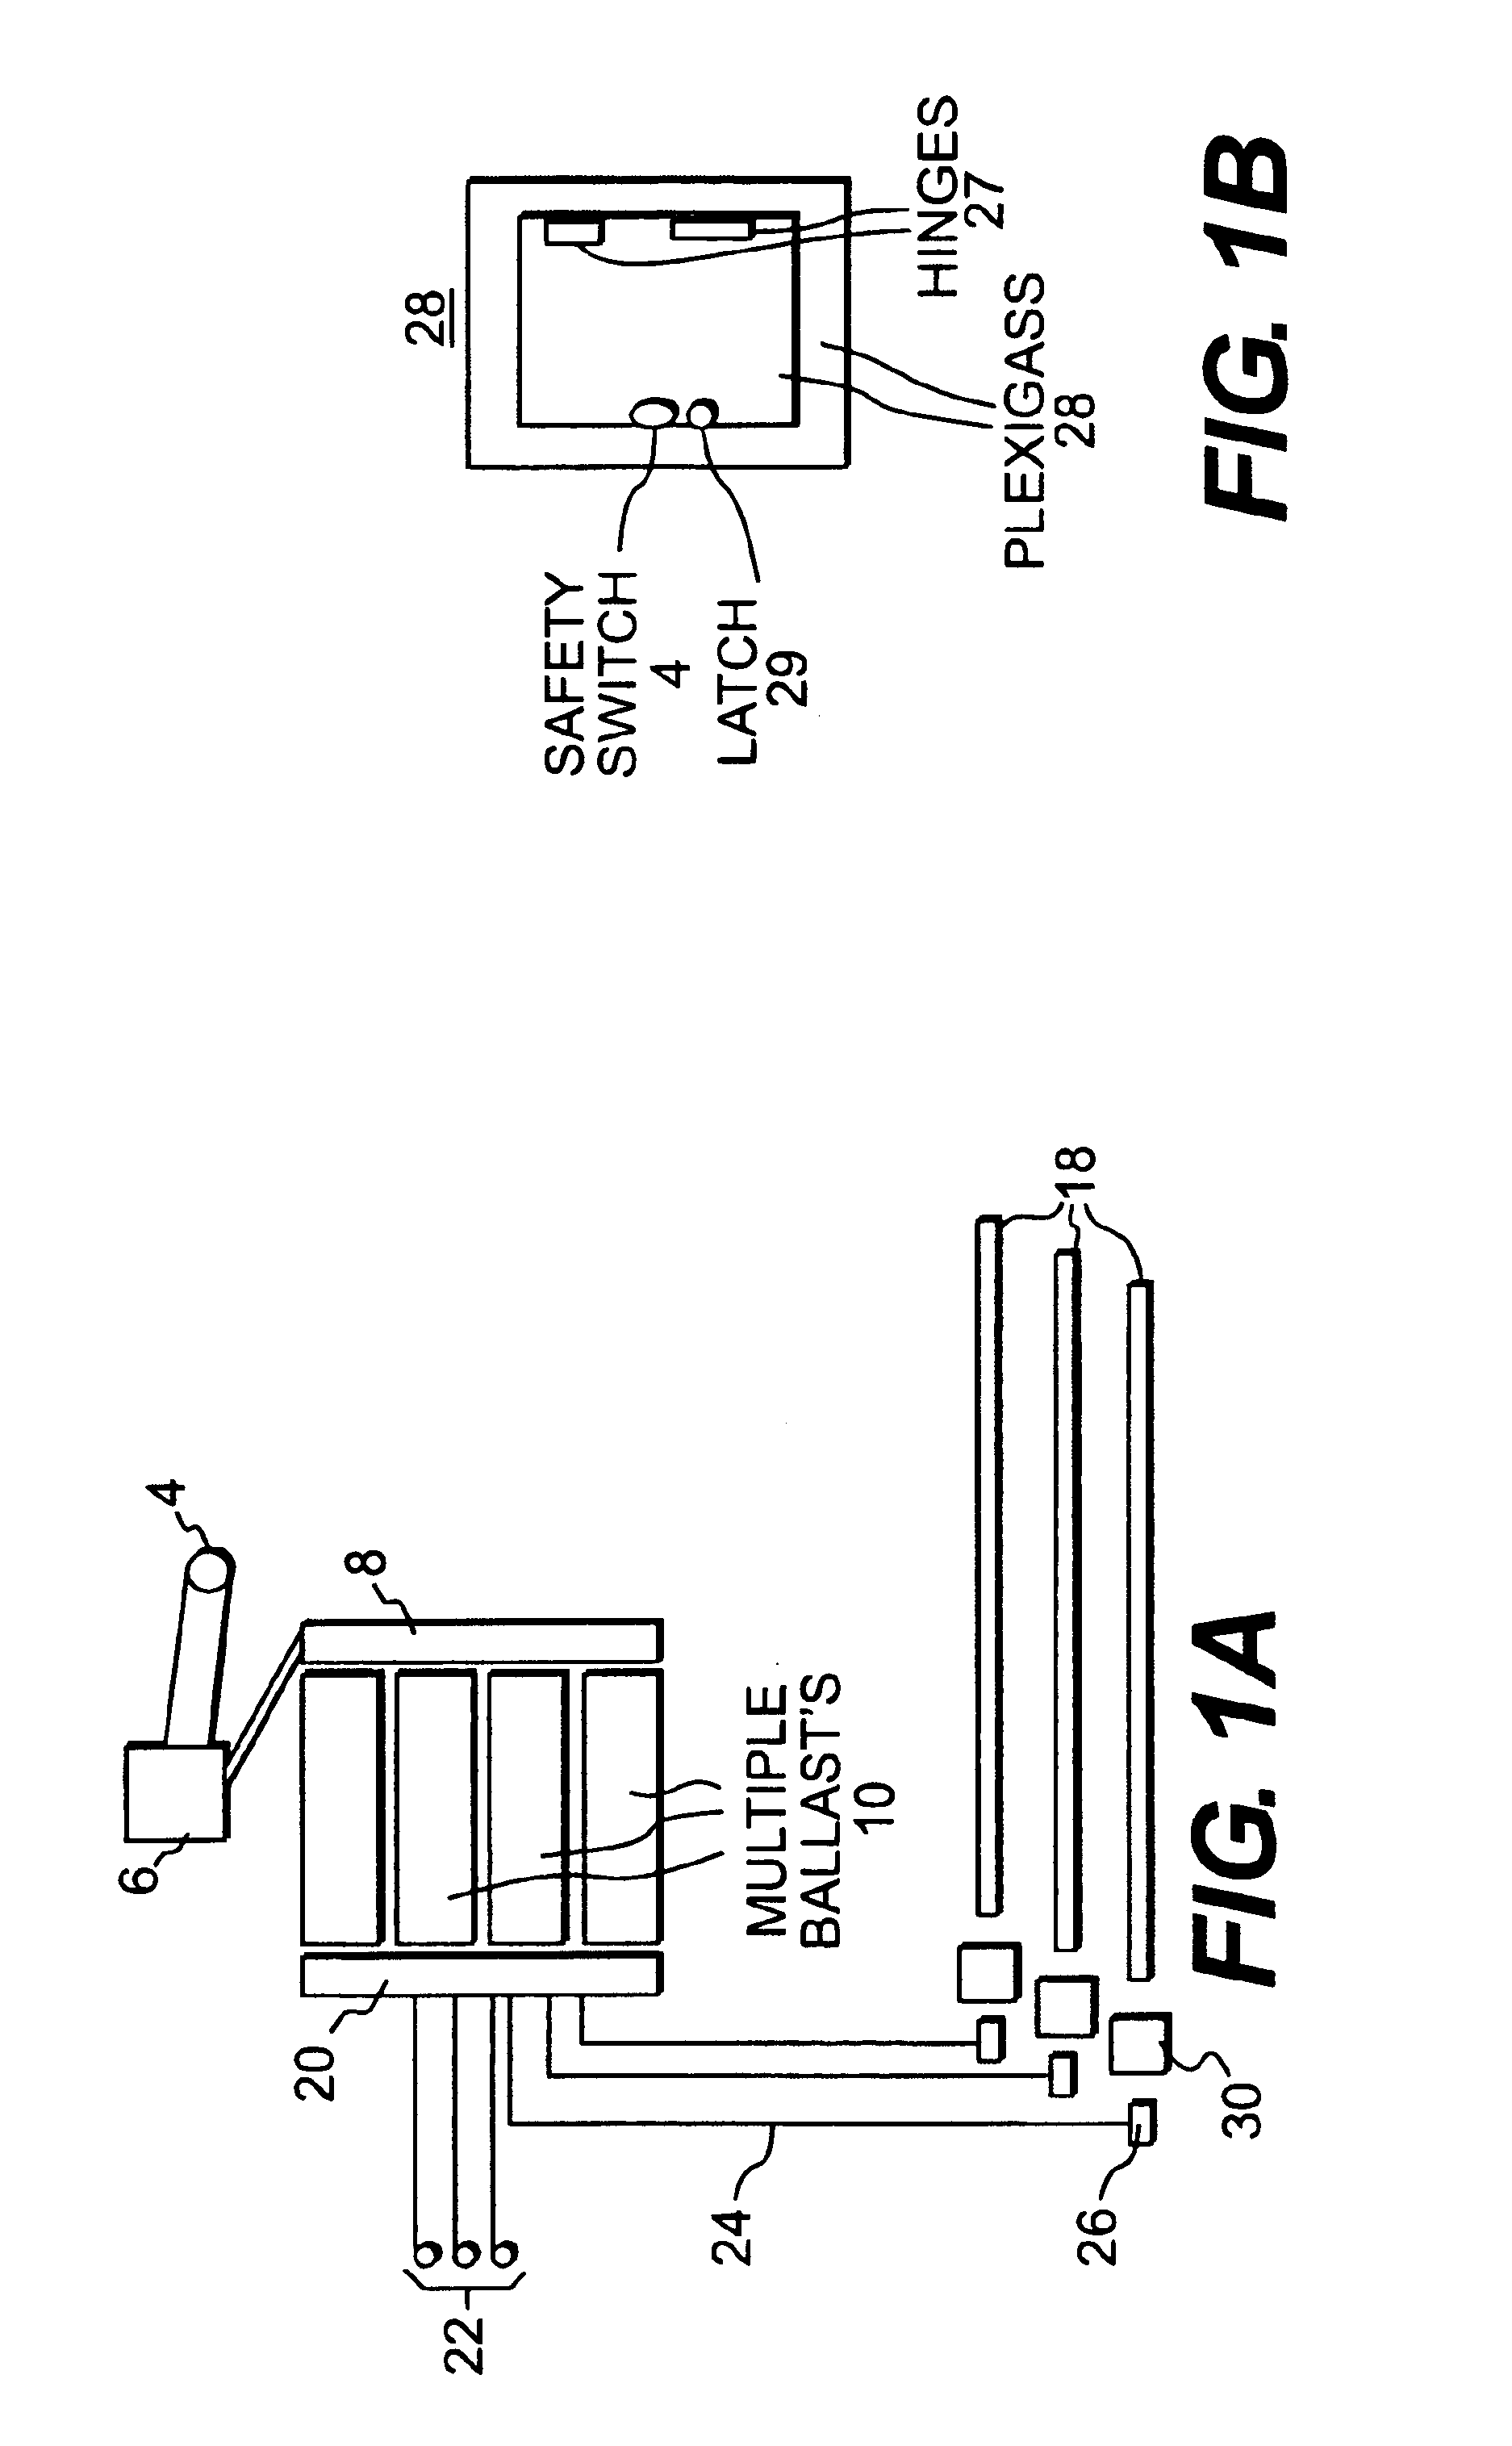 Ultraviolet air purification systems